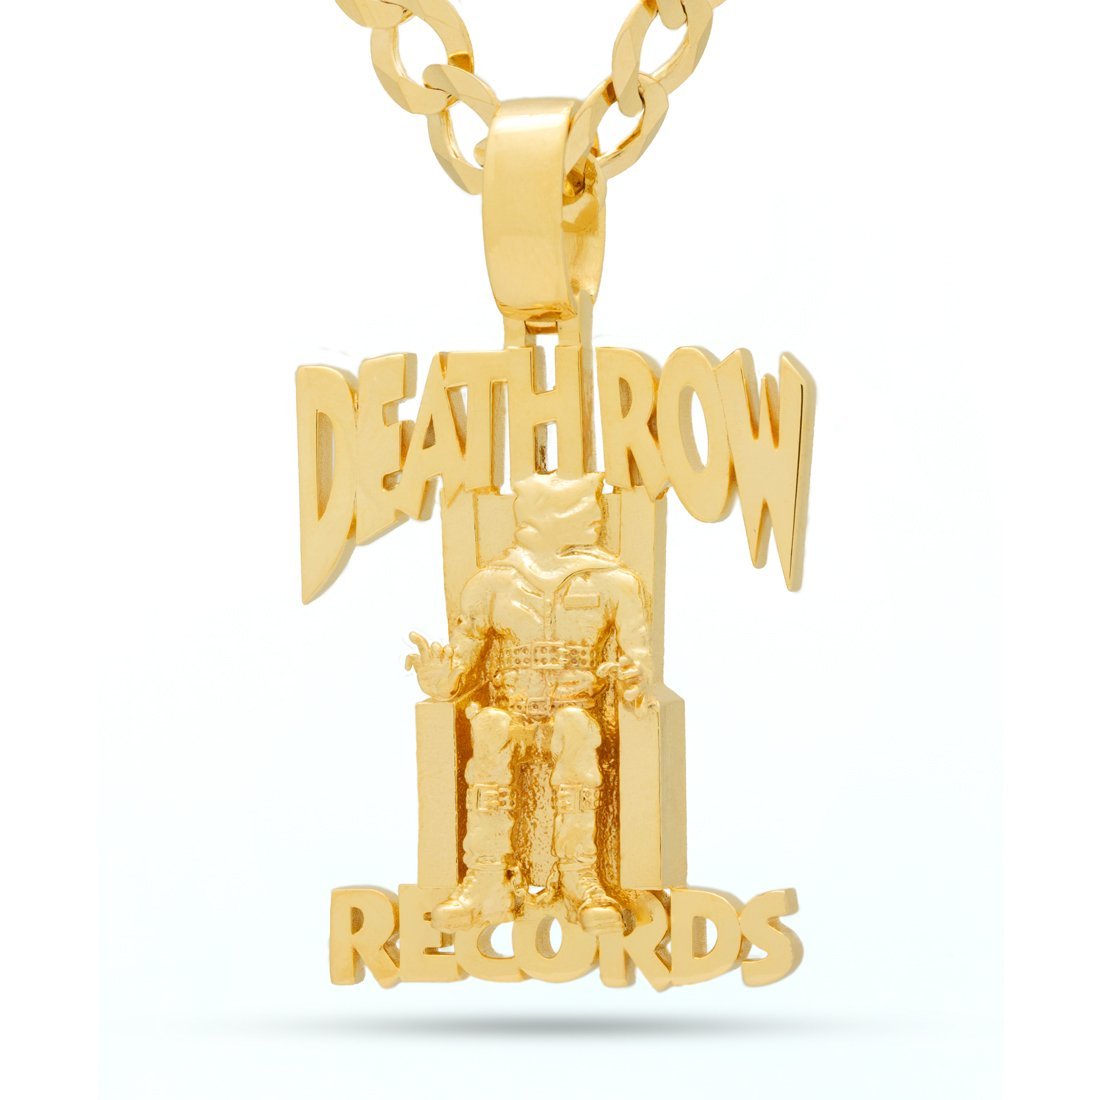 Solid Gold / 14K Gold / 2.3" Death Row Records x King Ice - Death Row Necklace